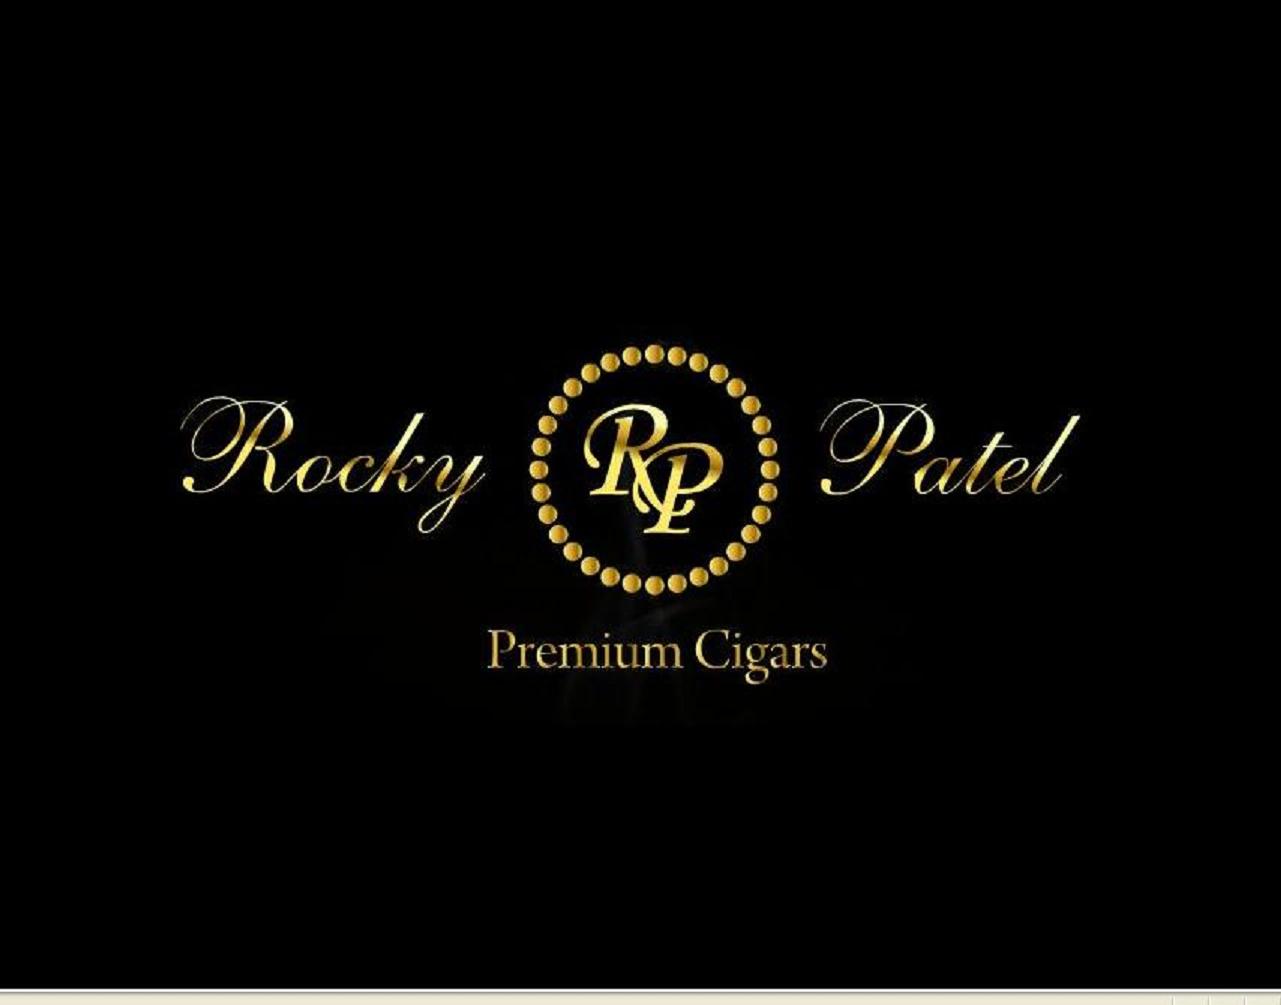 Patrick Vivalo on Working With Rocky Patel Cigars - Fine Tobacco NYC1281 x 1005